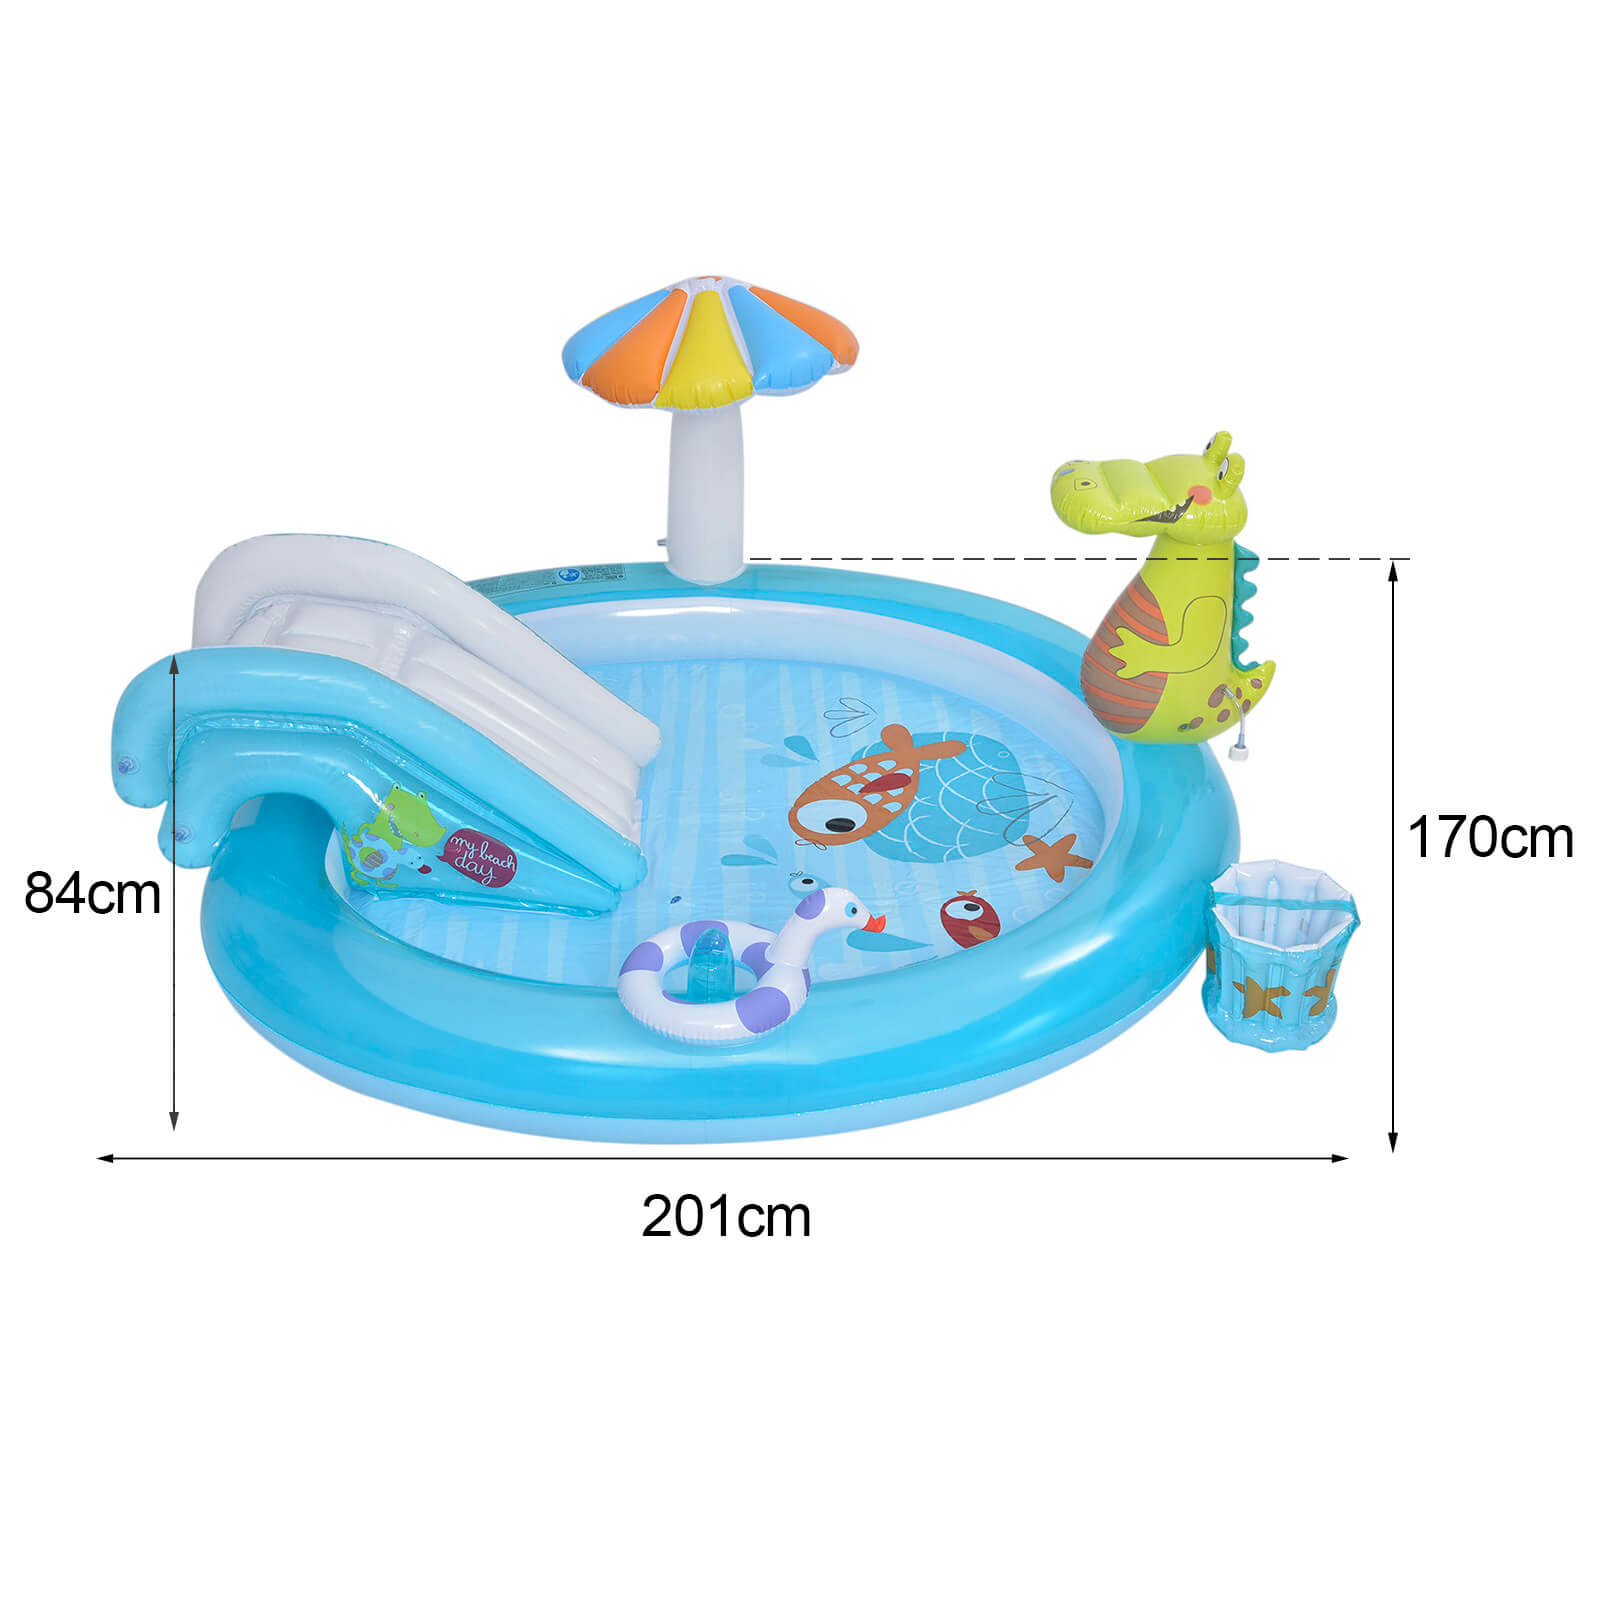 Children's Inflatable Pool